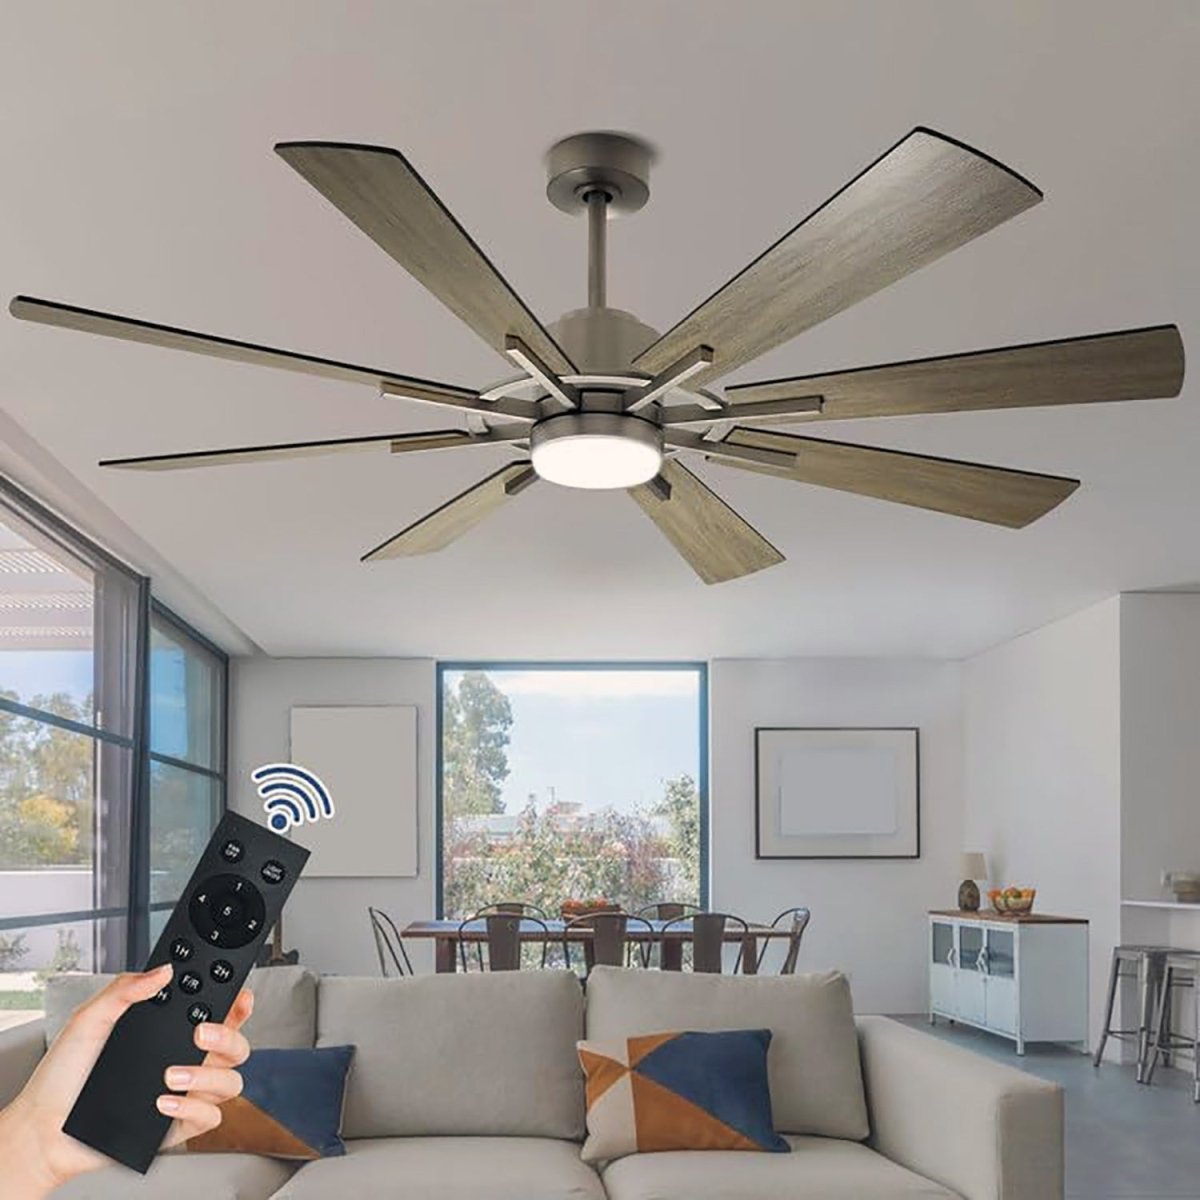 Depuley Ceiling Fan with Lights, 60" Reversible Large Industrial Ceiling fan with 8 Plywood Blades, 3 Light Colors Fandelier Ceiling Fans with Remote for Indoor and Covered Outdoor, 5-Speed Timer Gray - WS-FPZ44-18C-GR 2 | DEPULEY